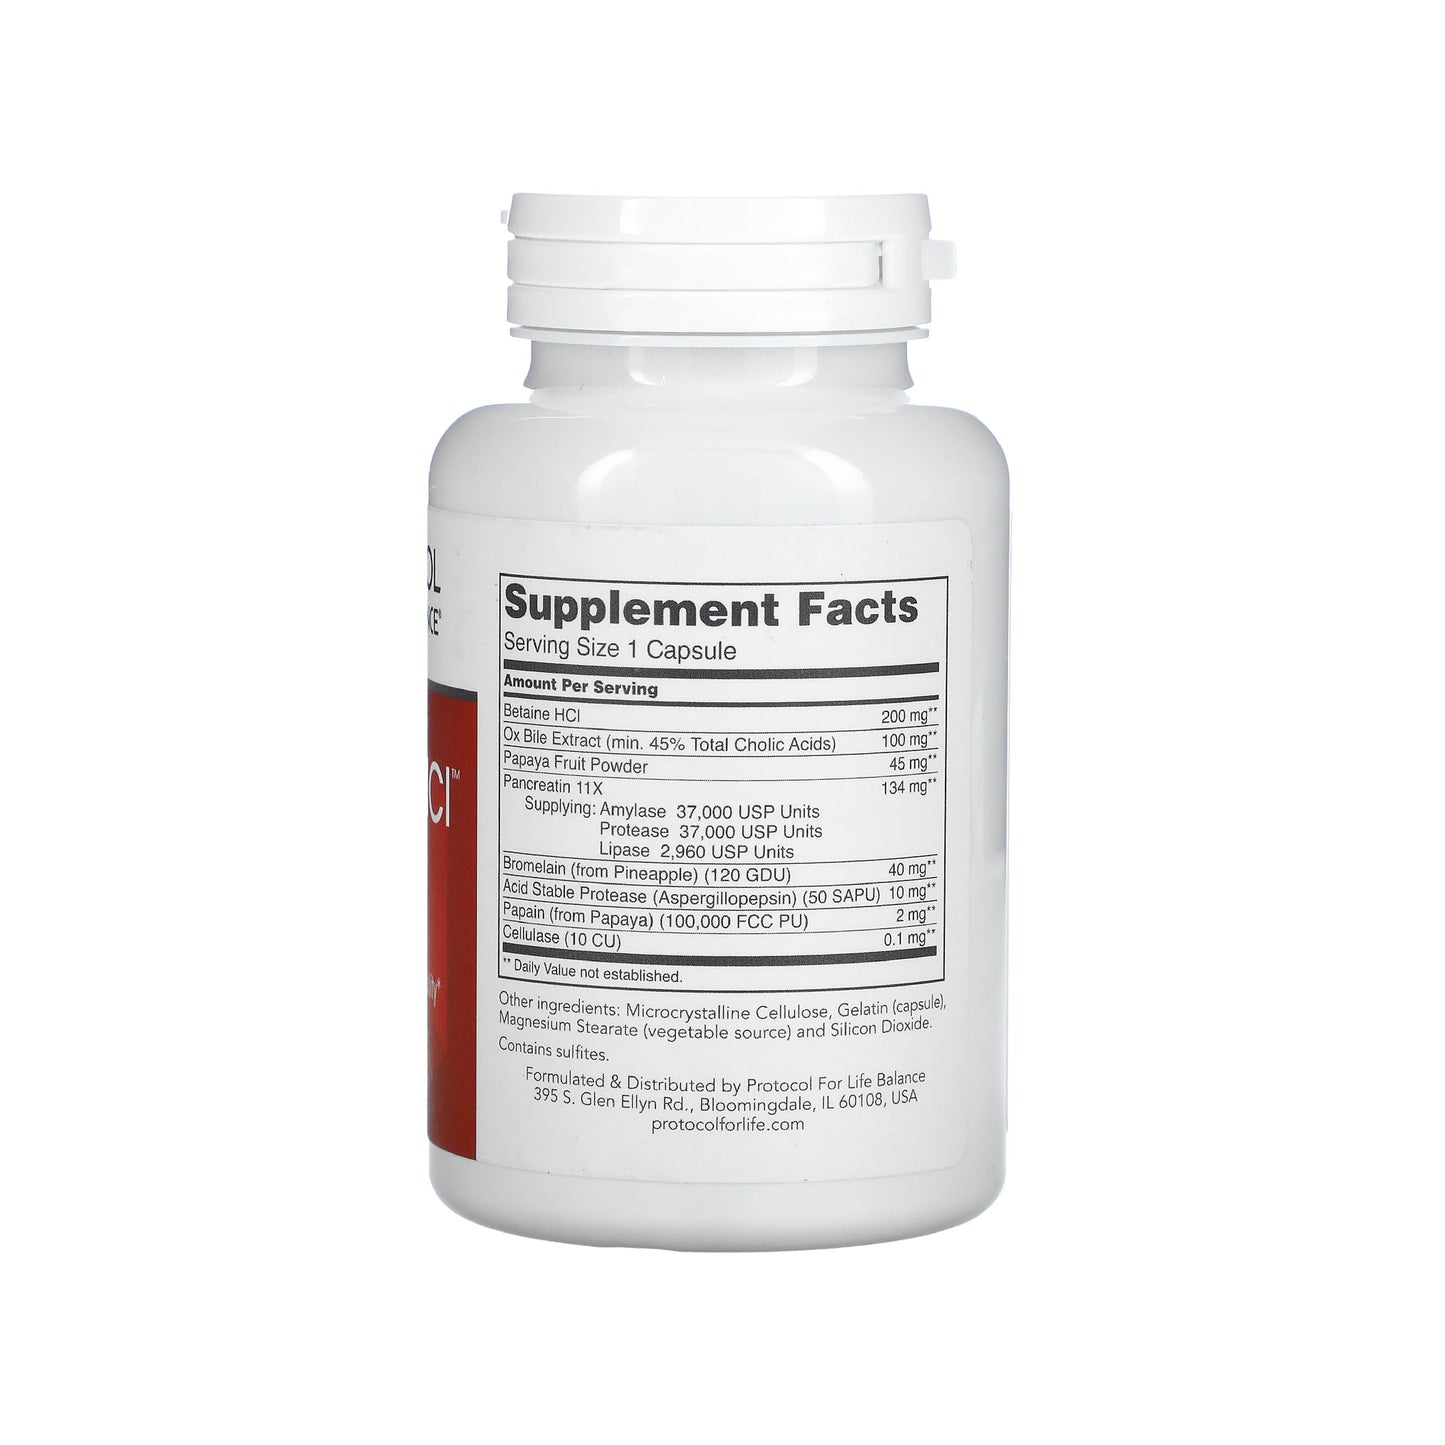 Protocol for Life Balance, Enzymes-HCl, 120 Capsules - Bloom Concept